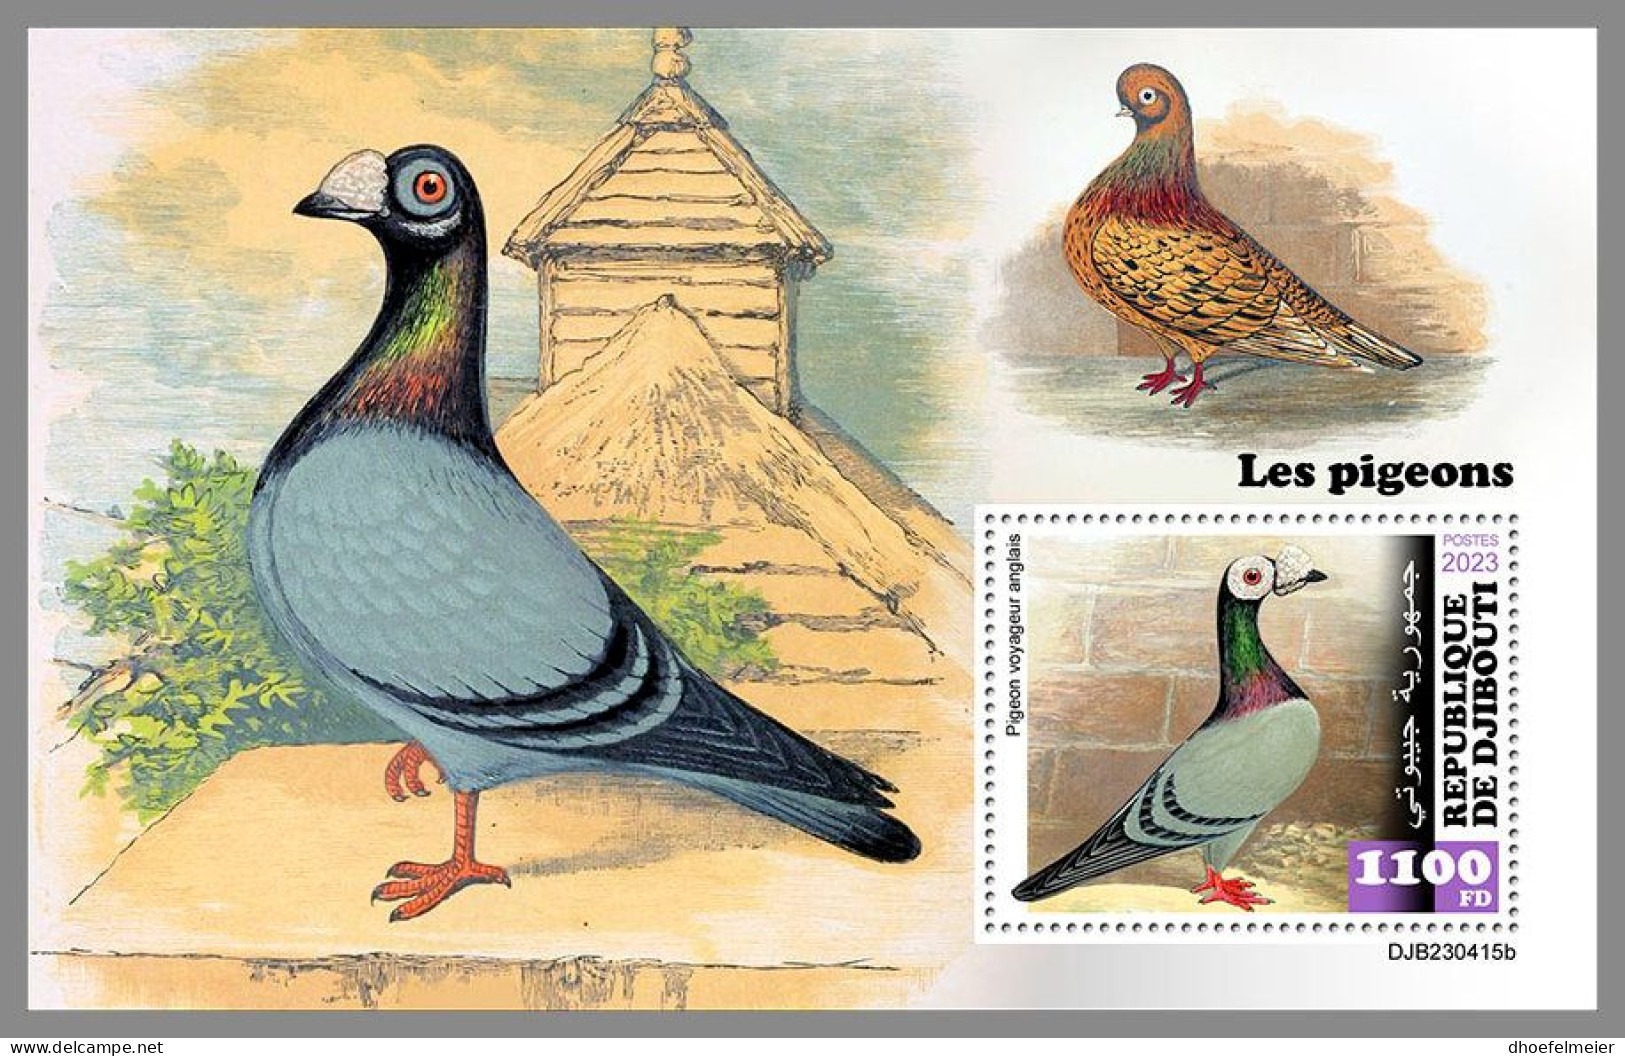 DJIBOUTI 2023 MNH Pigeons Tauben S/S – OFFICIAL ISSUE – DHQ2420 - Pigeons & Columbiformes